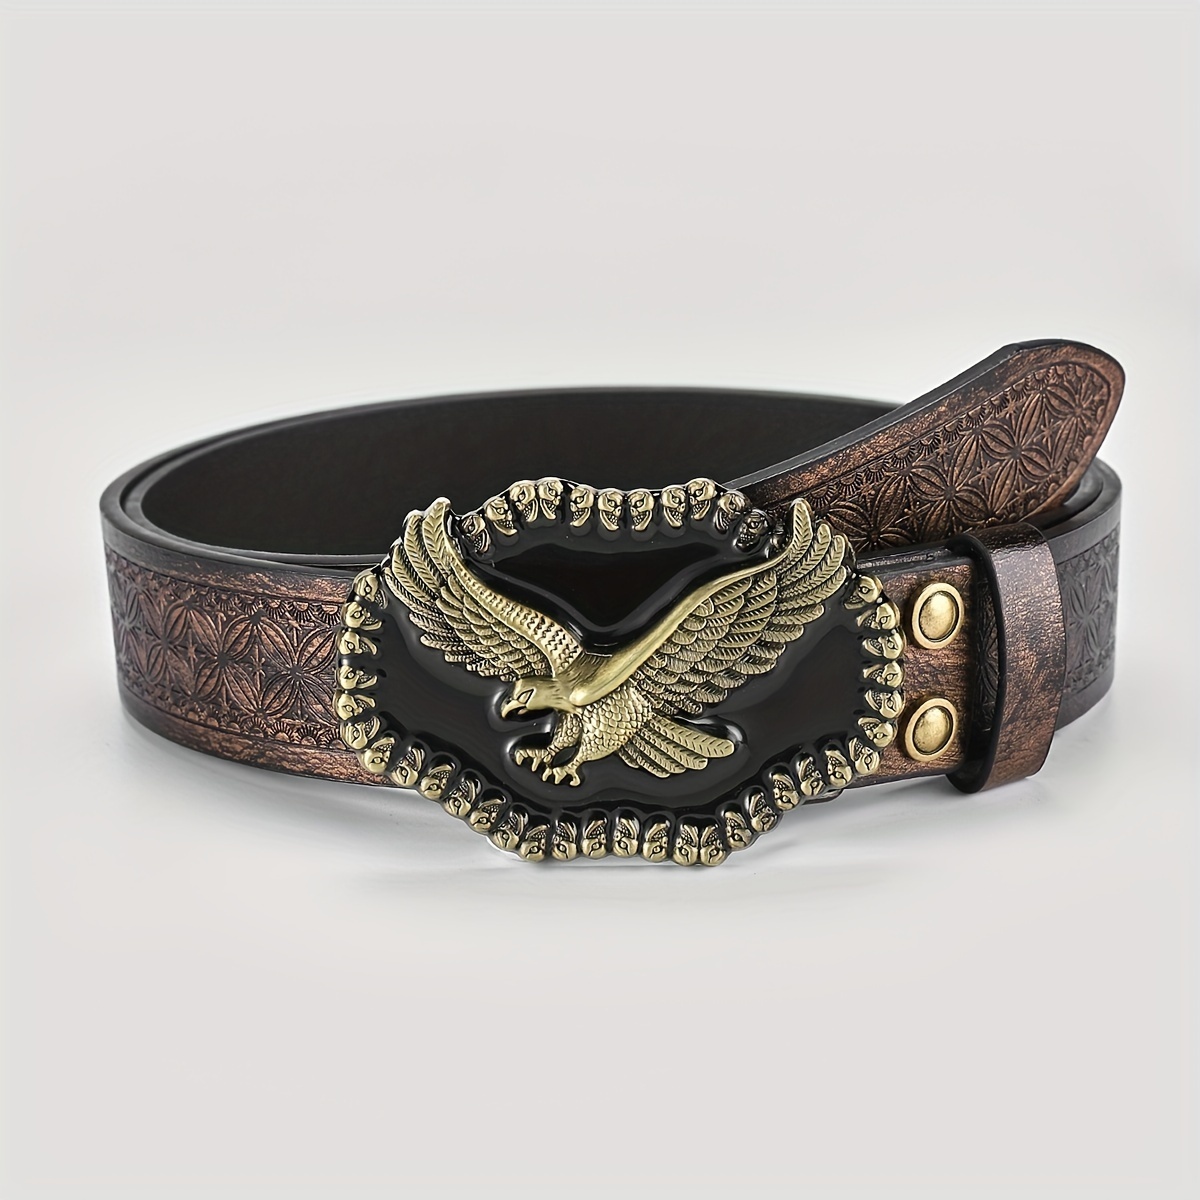 Unisex Brown Leather Belt with Mexican Eagle Rhinestone